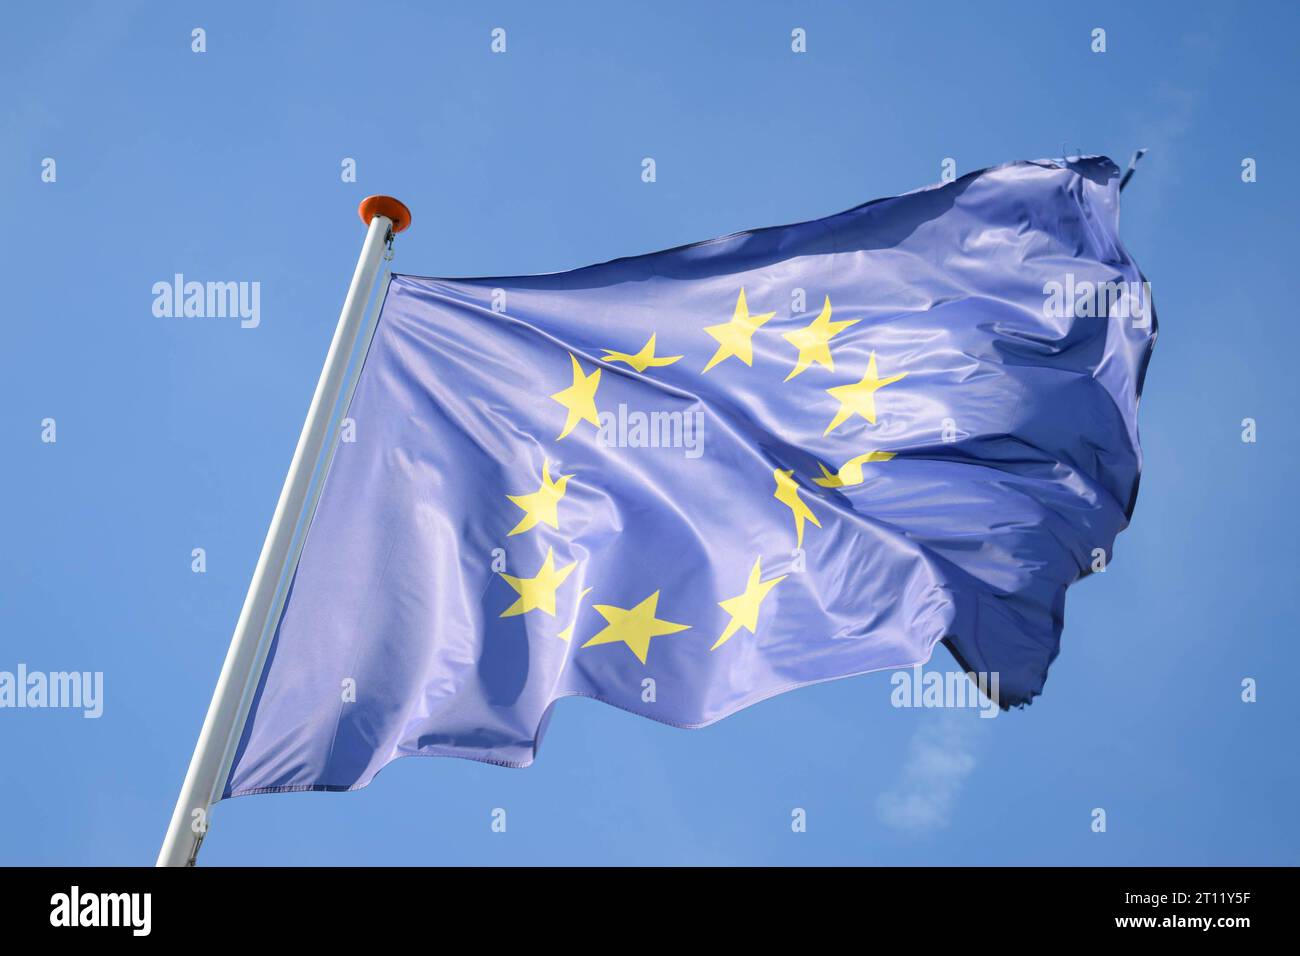 Flag of the European Union on a windy day against a blue sky. Stock Photo